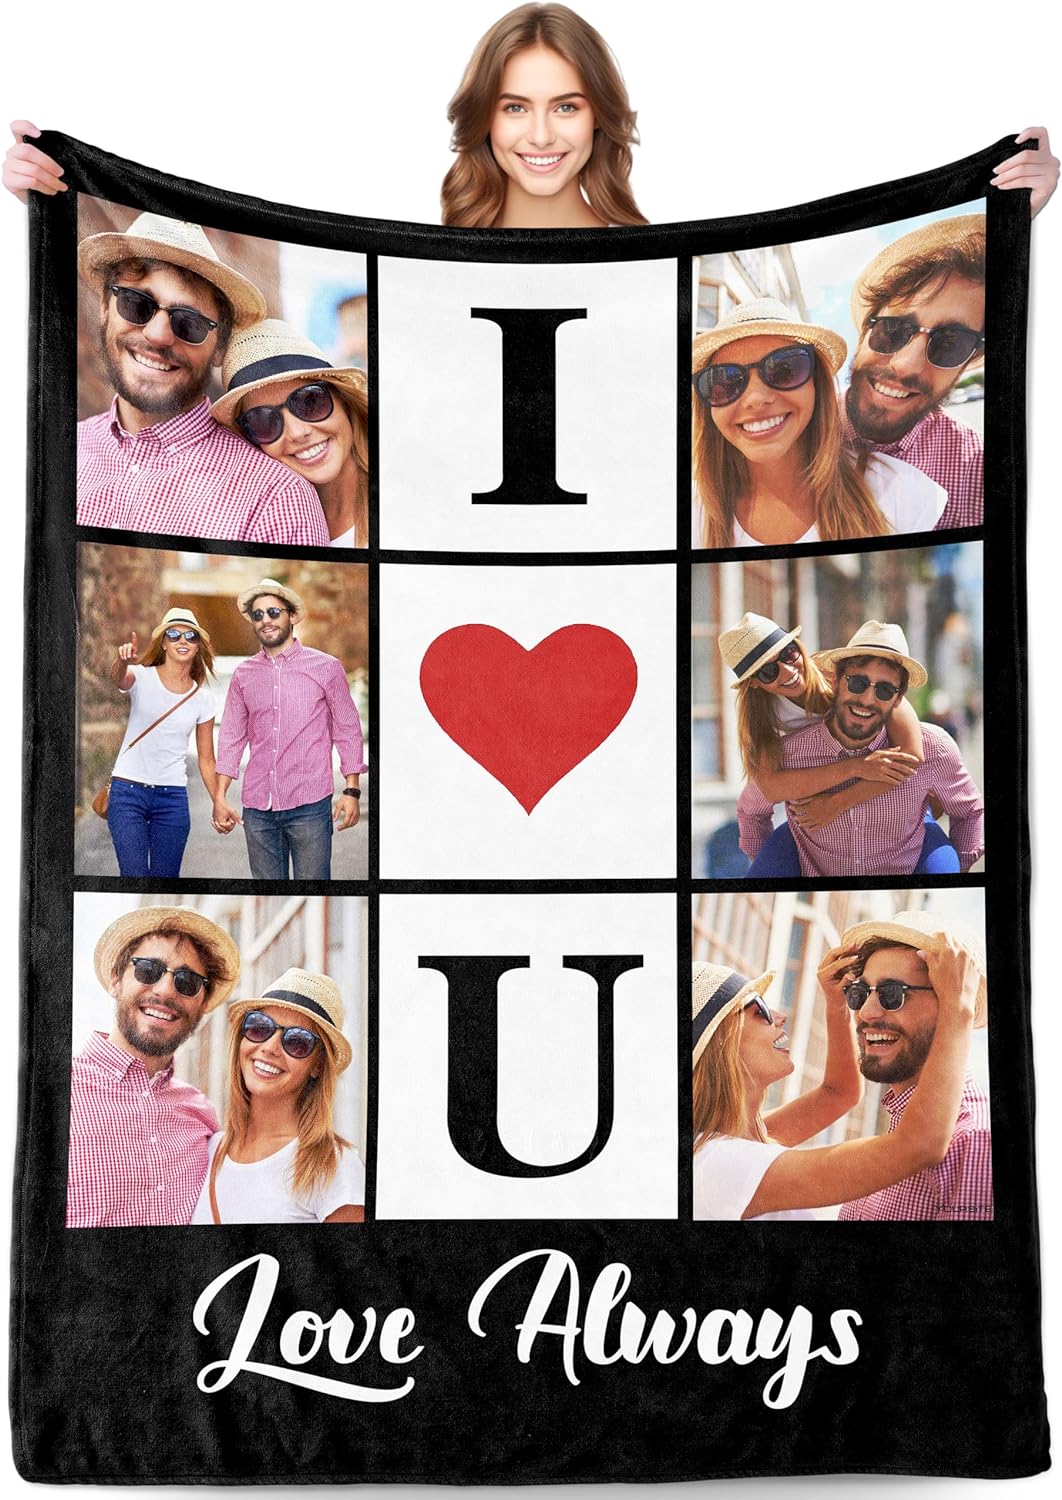 Valentines Day Gifts  Custom Blanket I Love You Couples Gifts Custom Photo Blanket for Girlfriend Boyfriend Gifts, Personalized Picture Blankets for Christmas Couples Gifts